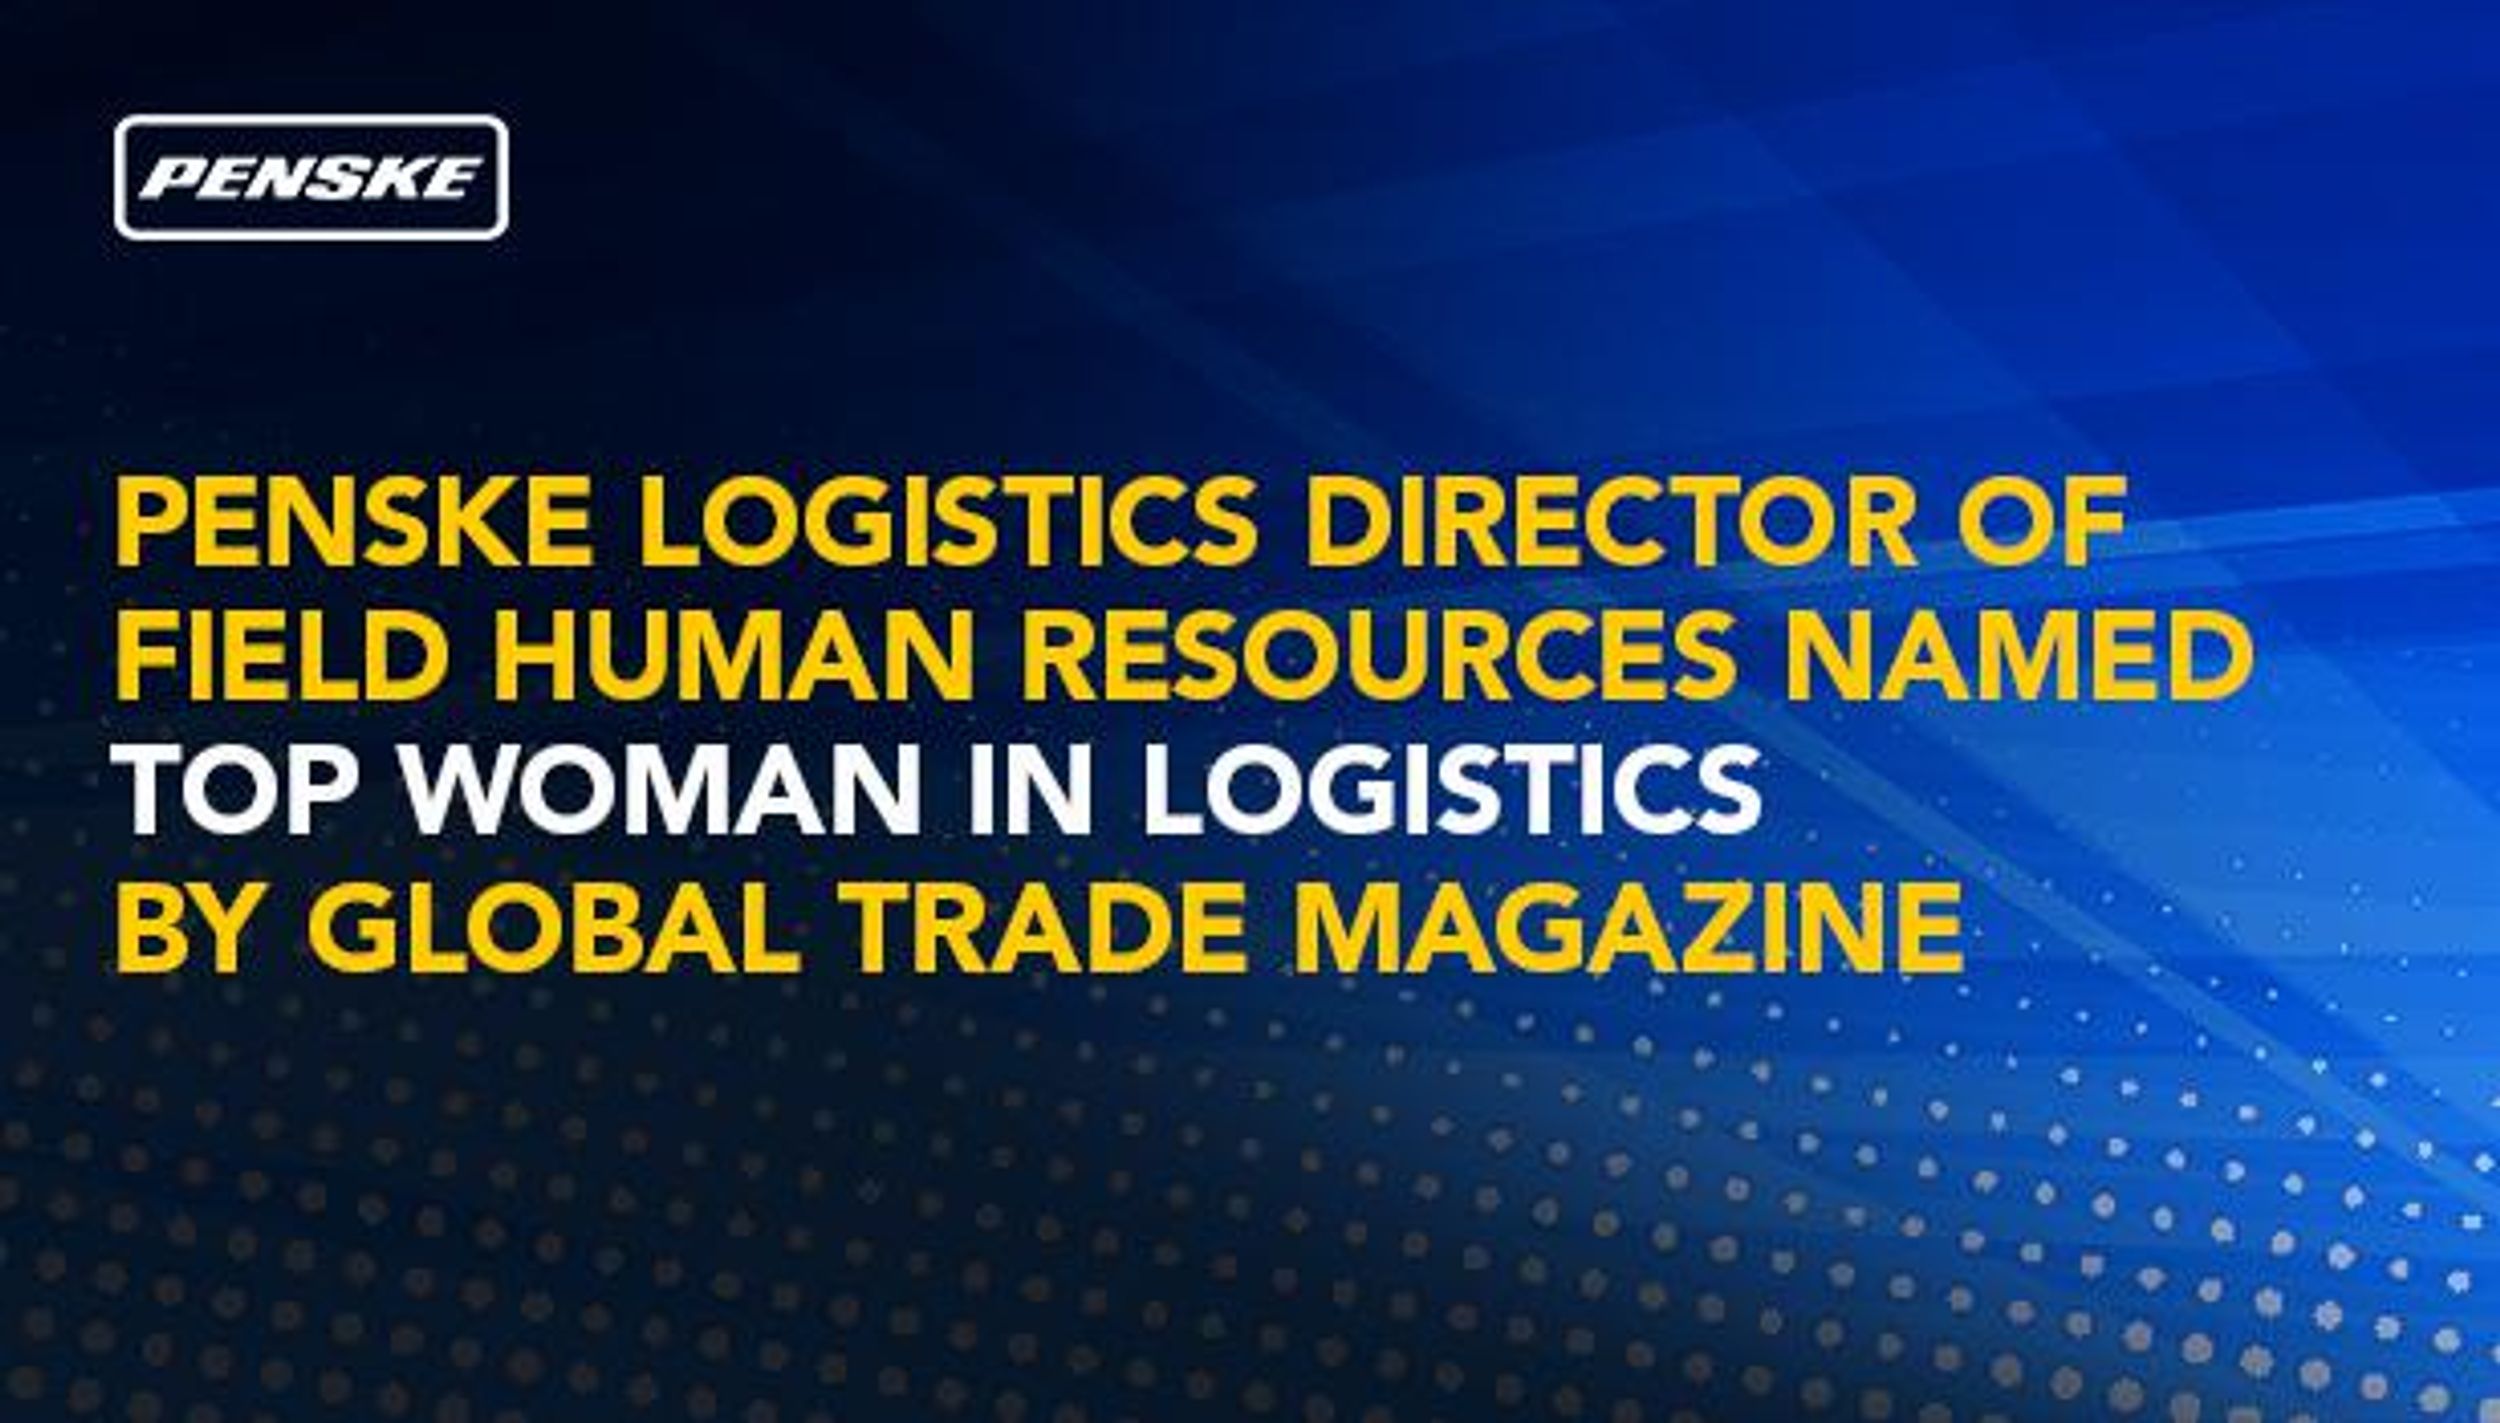 Penske Logistics’ Director of Field Human Resources Named Top Woman in Logistics by Global Trade Magazine